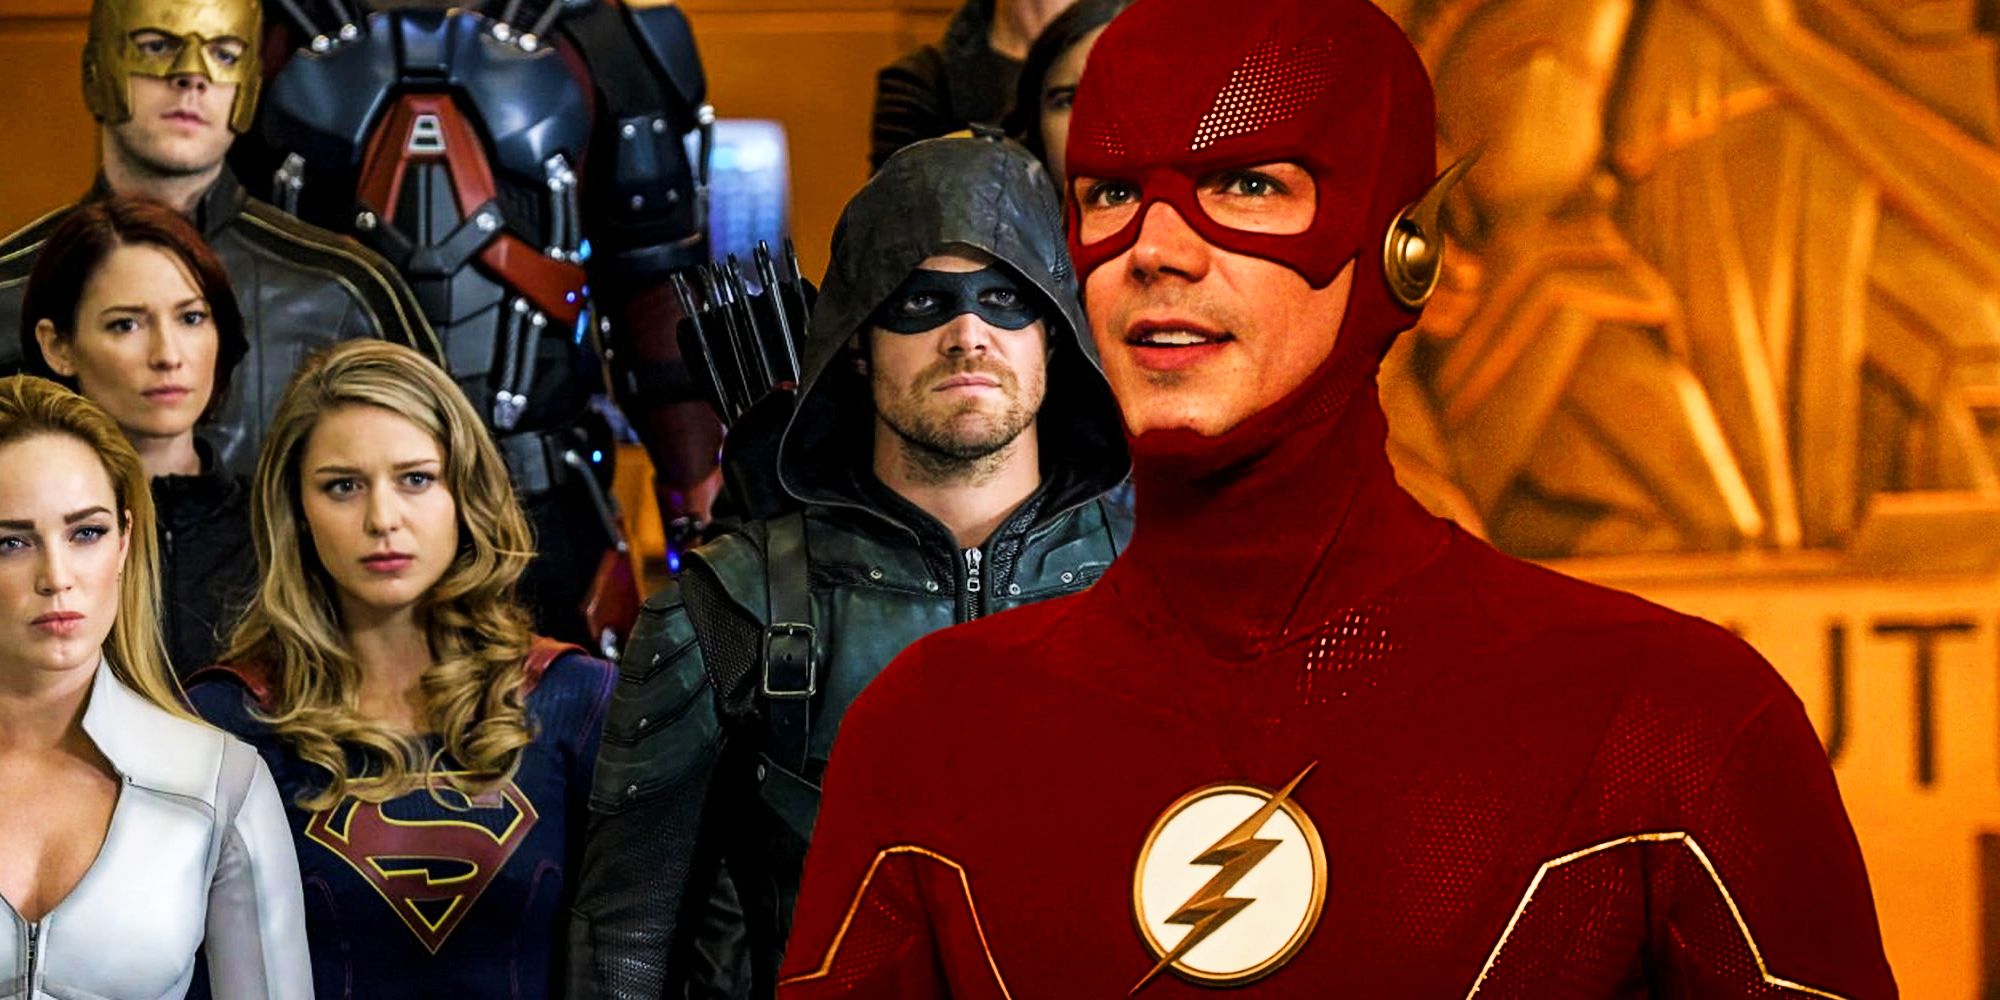 Arrowverse's Crisis on Infinite Earths and Grant Gustin as Flash